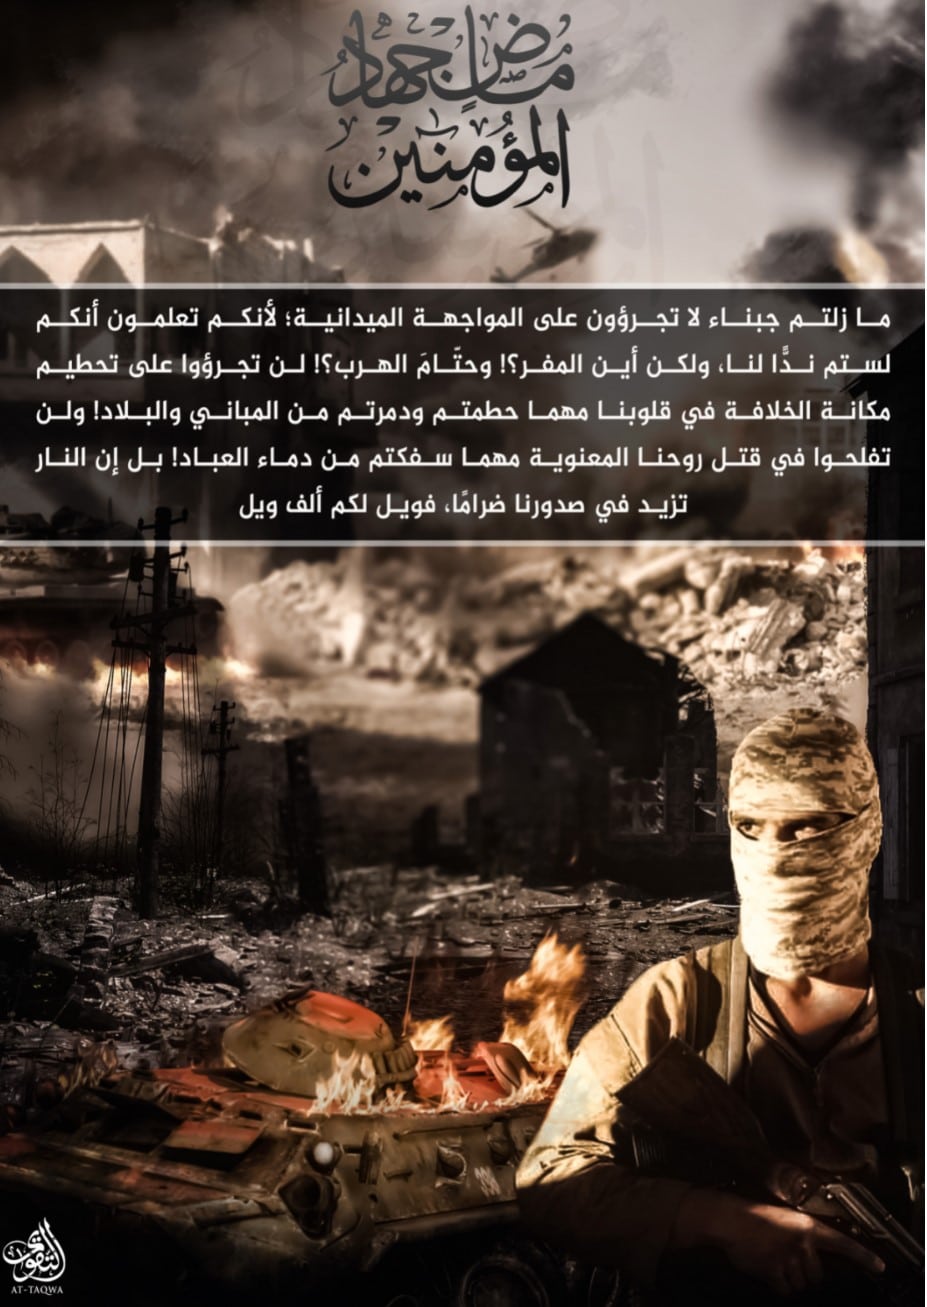 (Poster) al-Taqwa Media (Unofficial Islamic State): "Believers Jihad Will Continue" - 25 March 2022